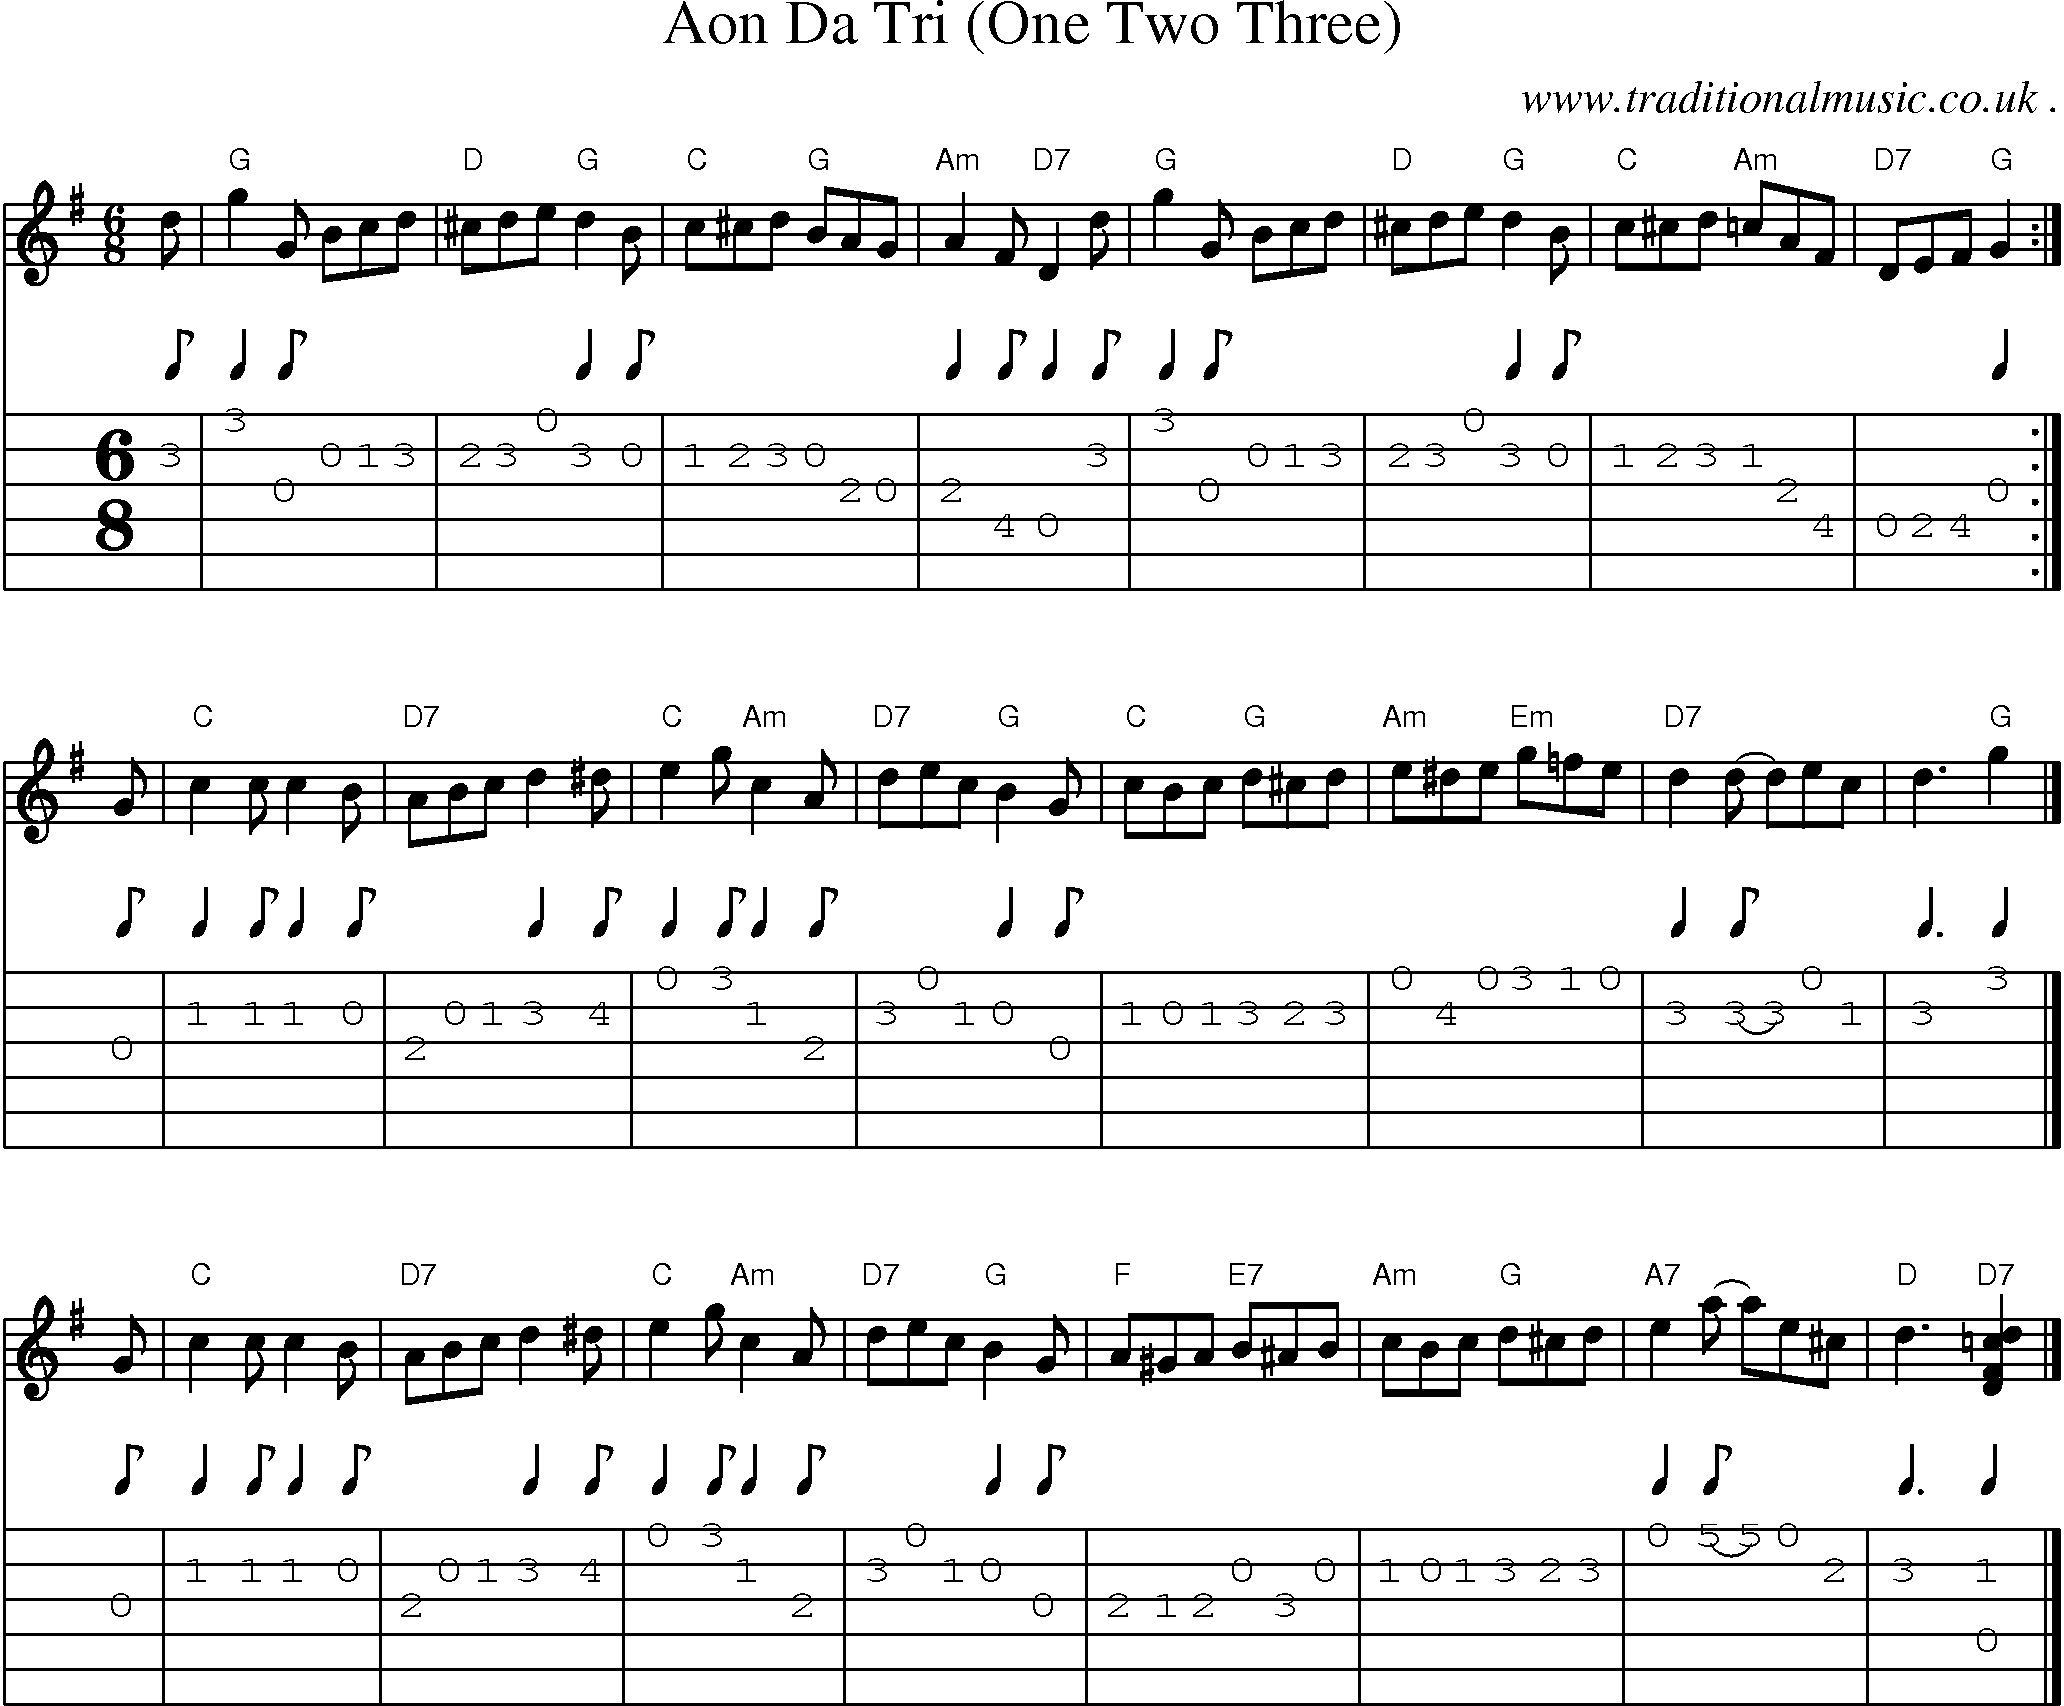 Sheet-music  score, Chords and Guitar Tabs for Aon Da Tri One Two Three